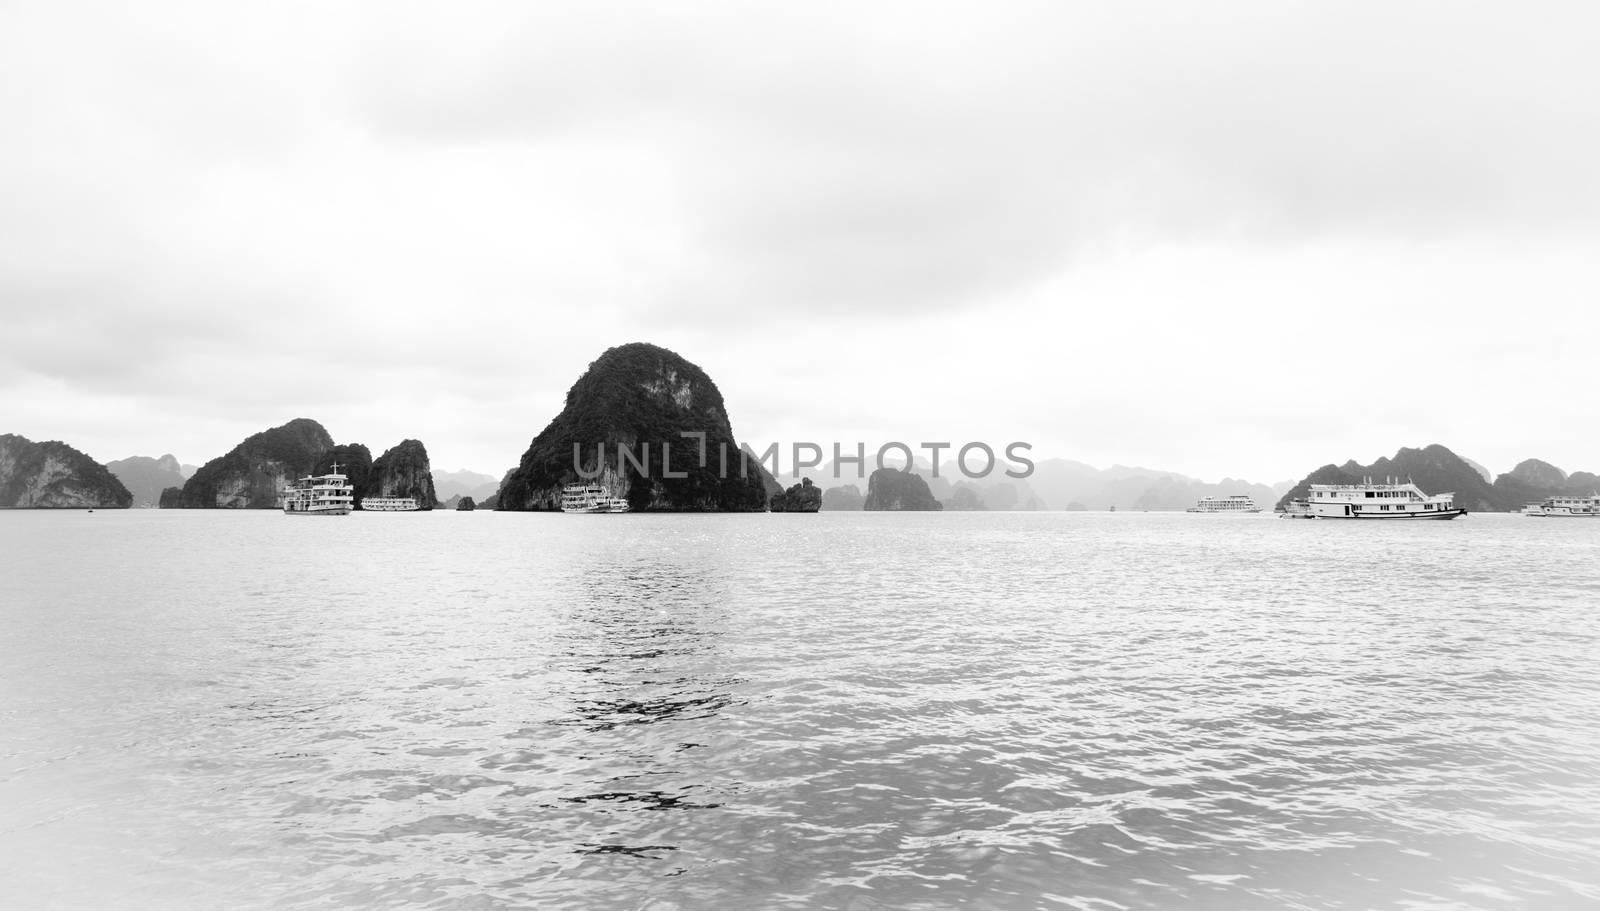 The water and mountains in Ha Long Bay, Vietnam